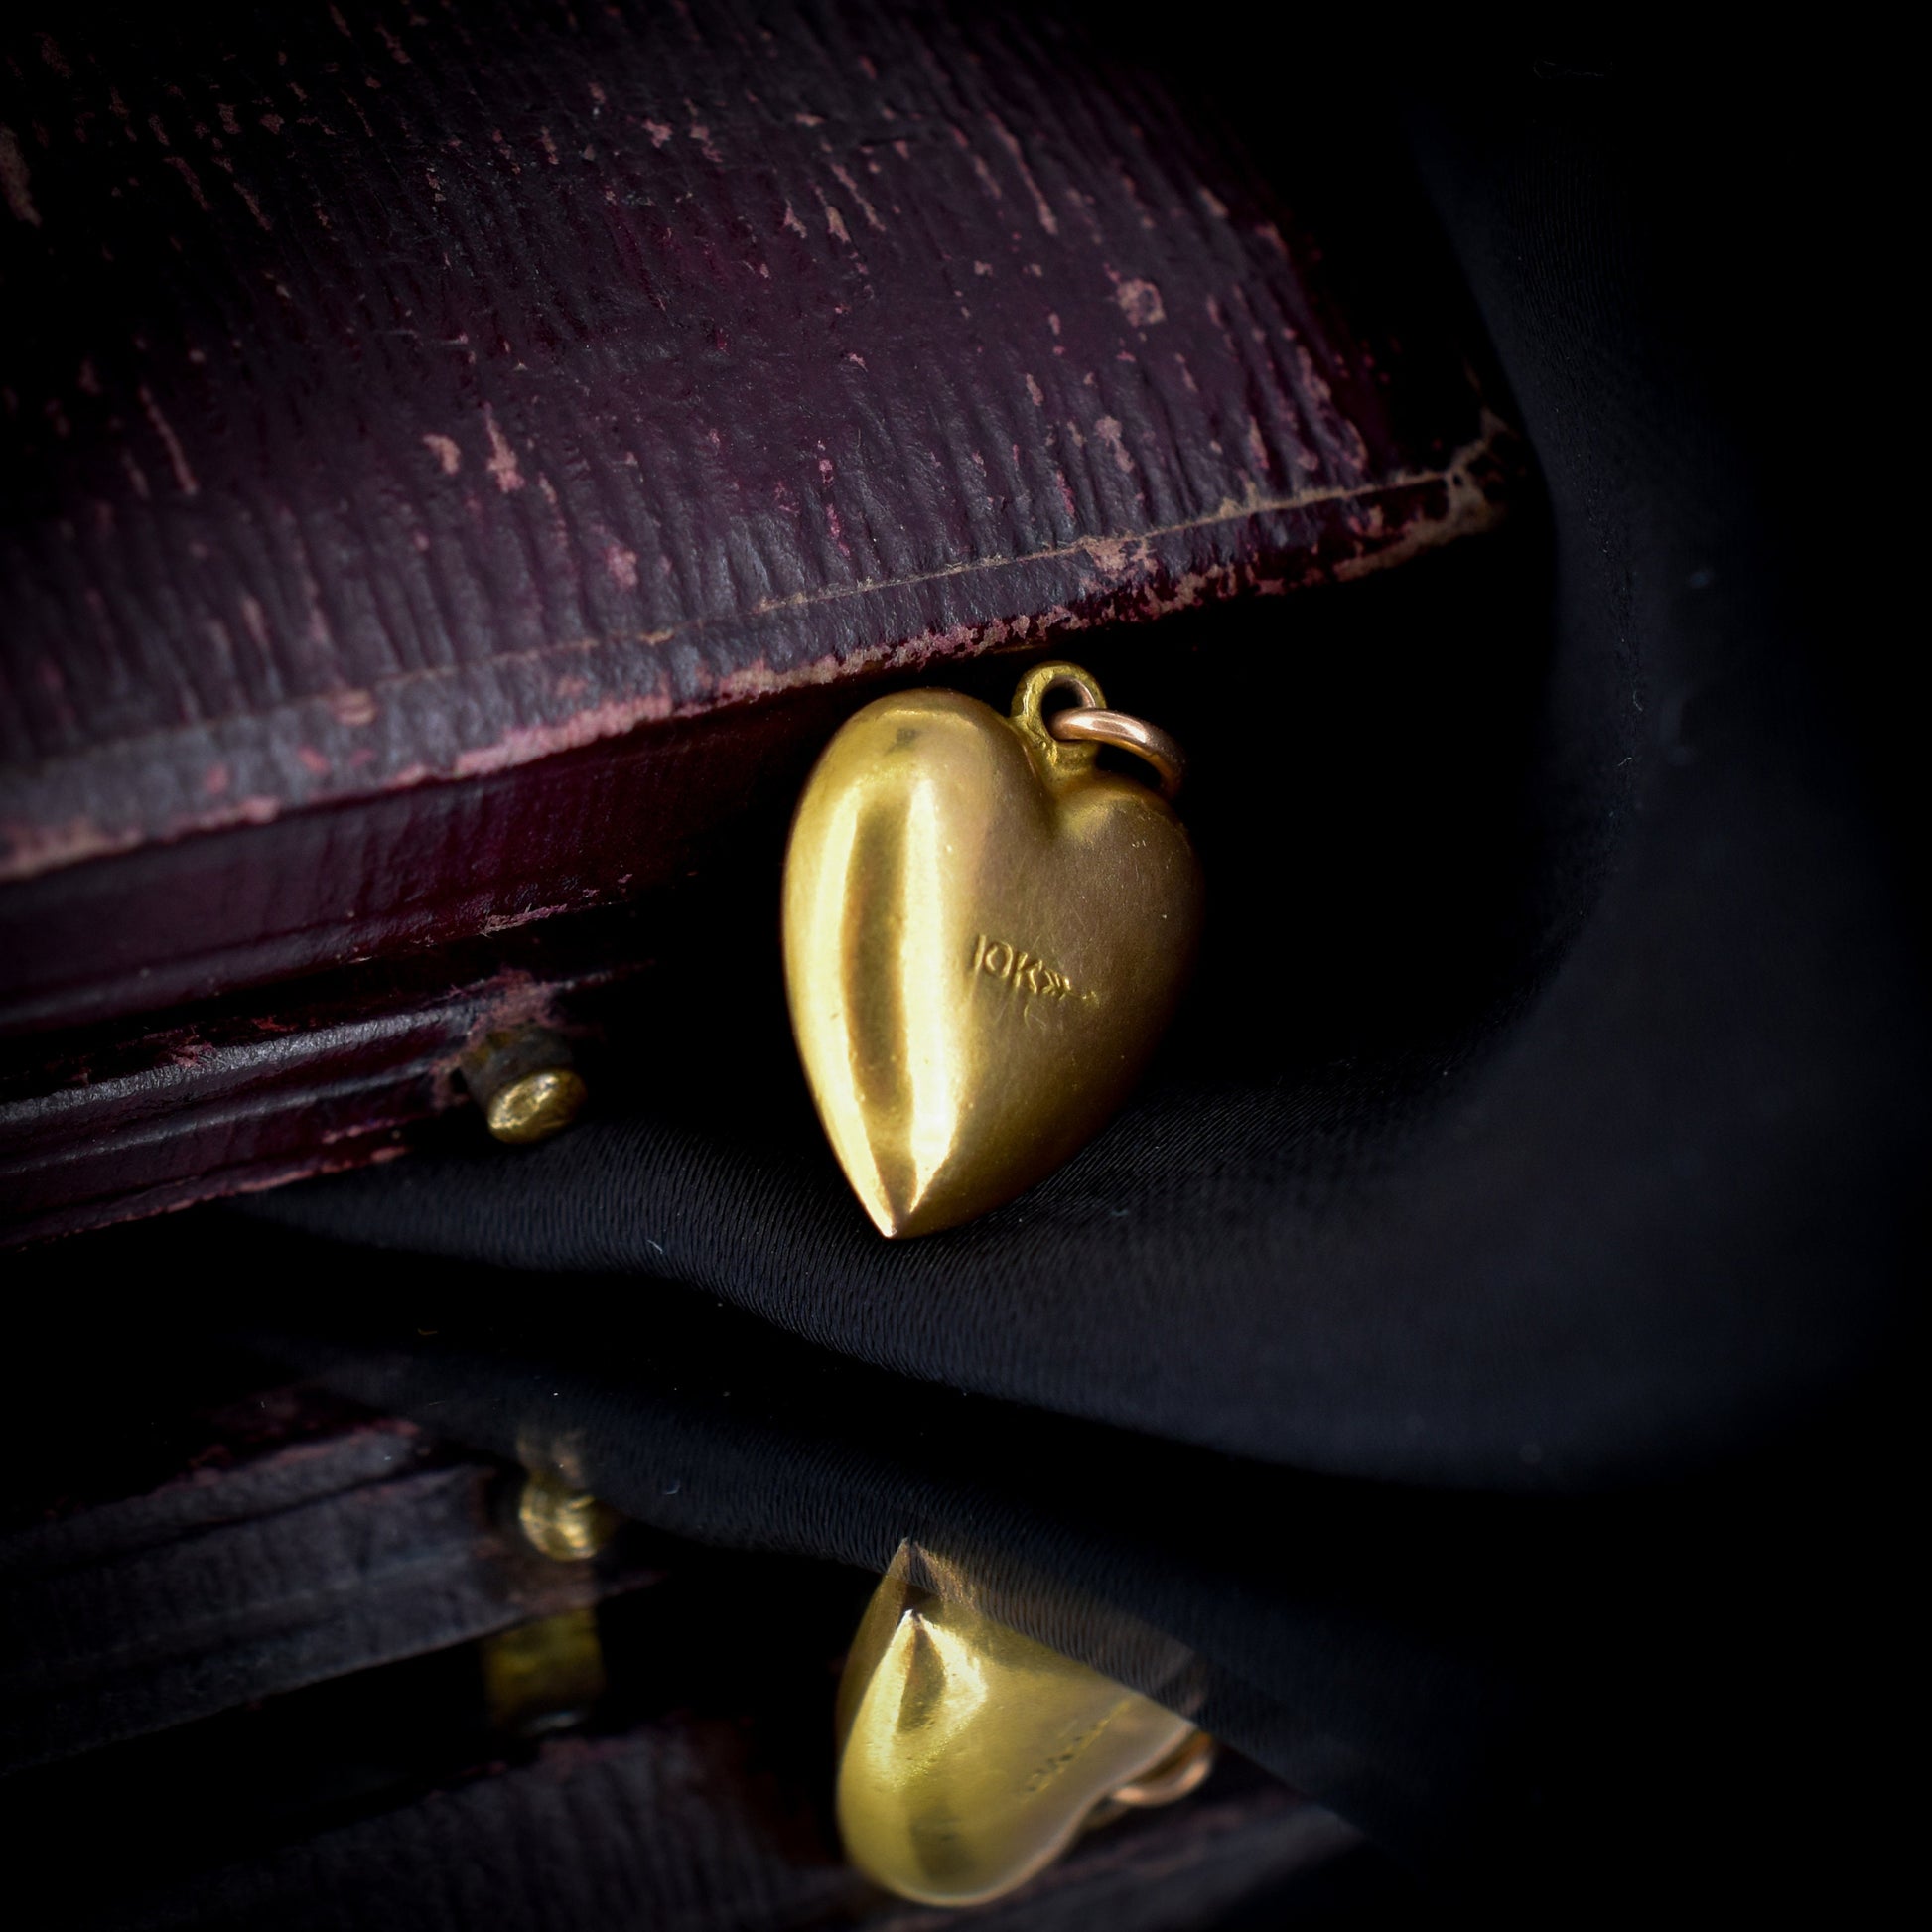 Antique Pearl 10ct Gold Heart Charm Pendant